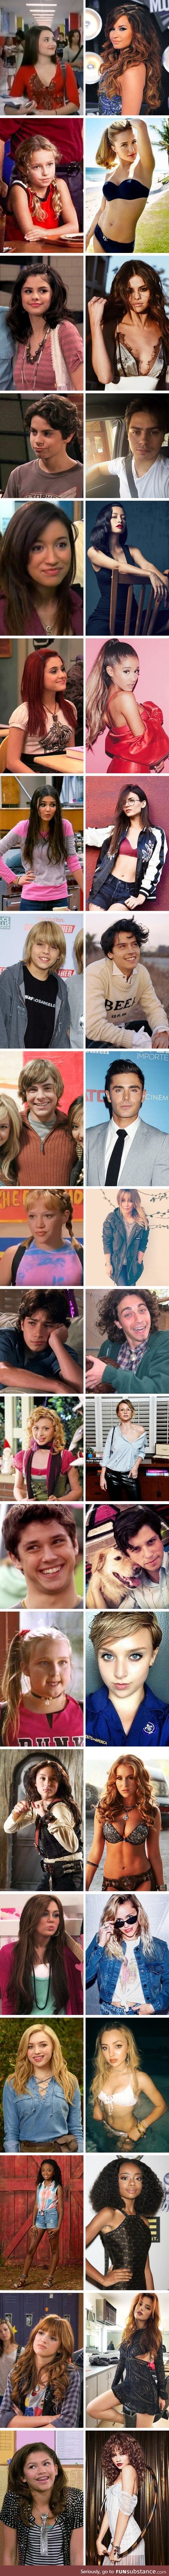 20 Disney and Nickelodeon Stars Who Grew Up Too Fast